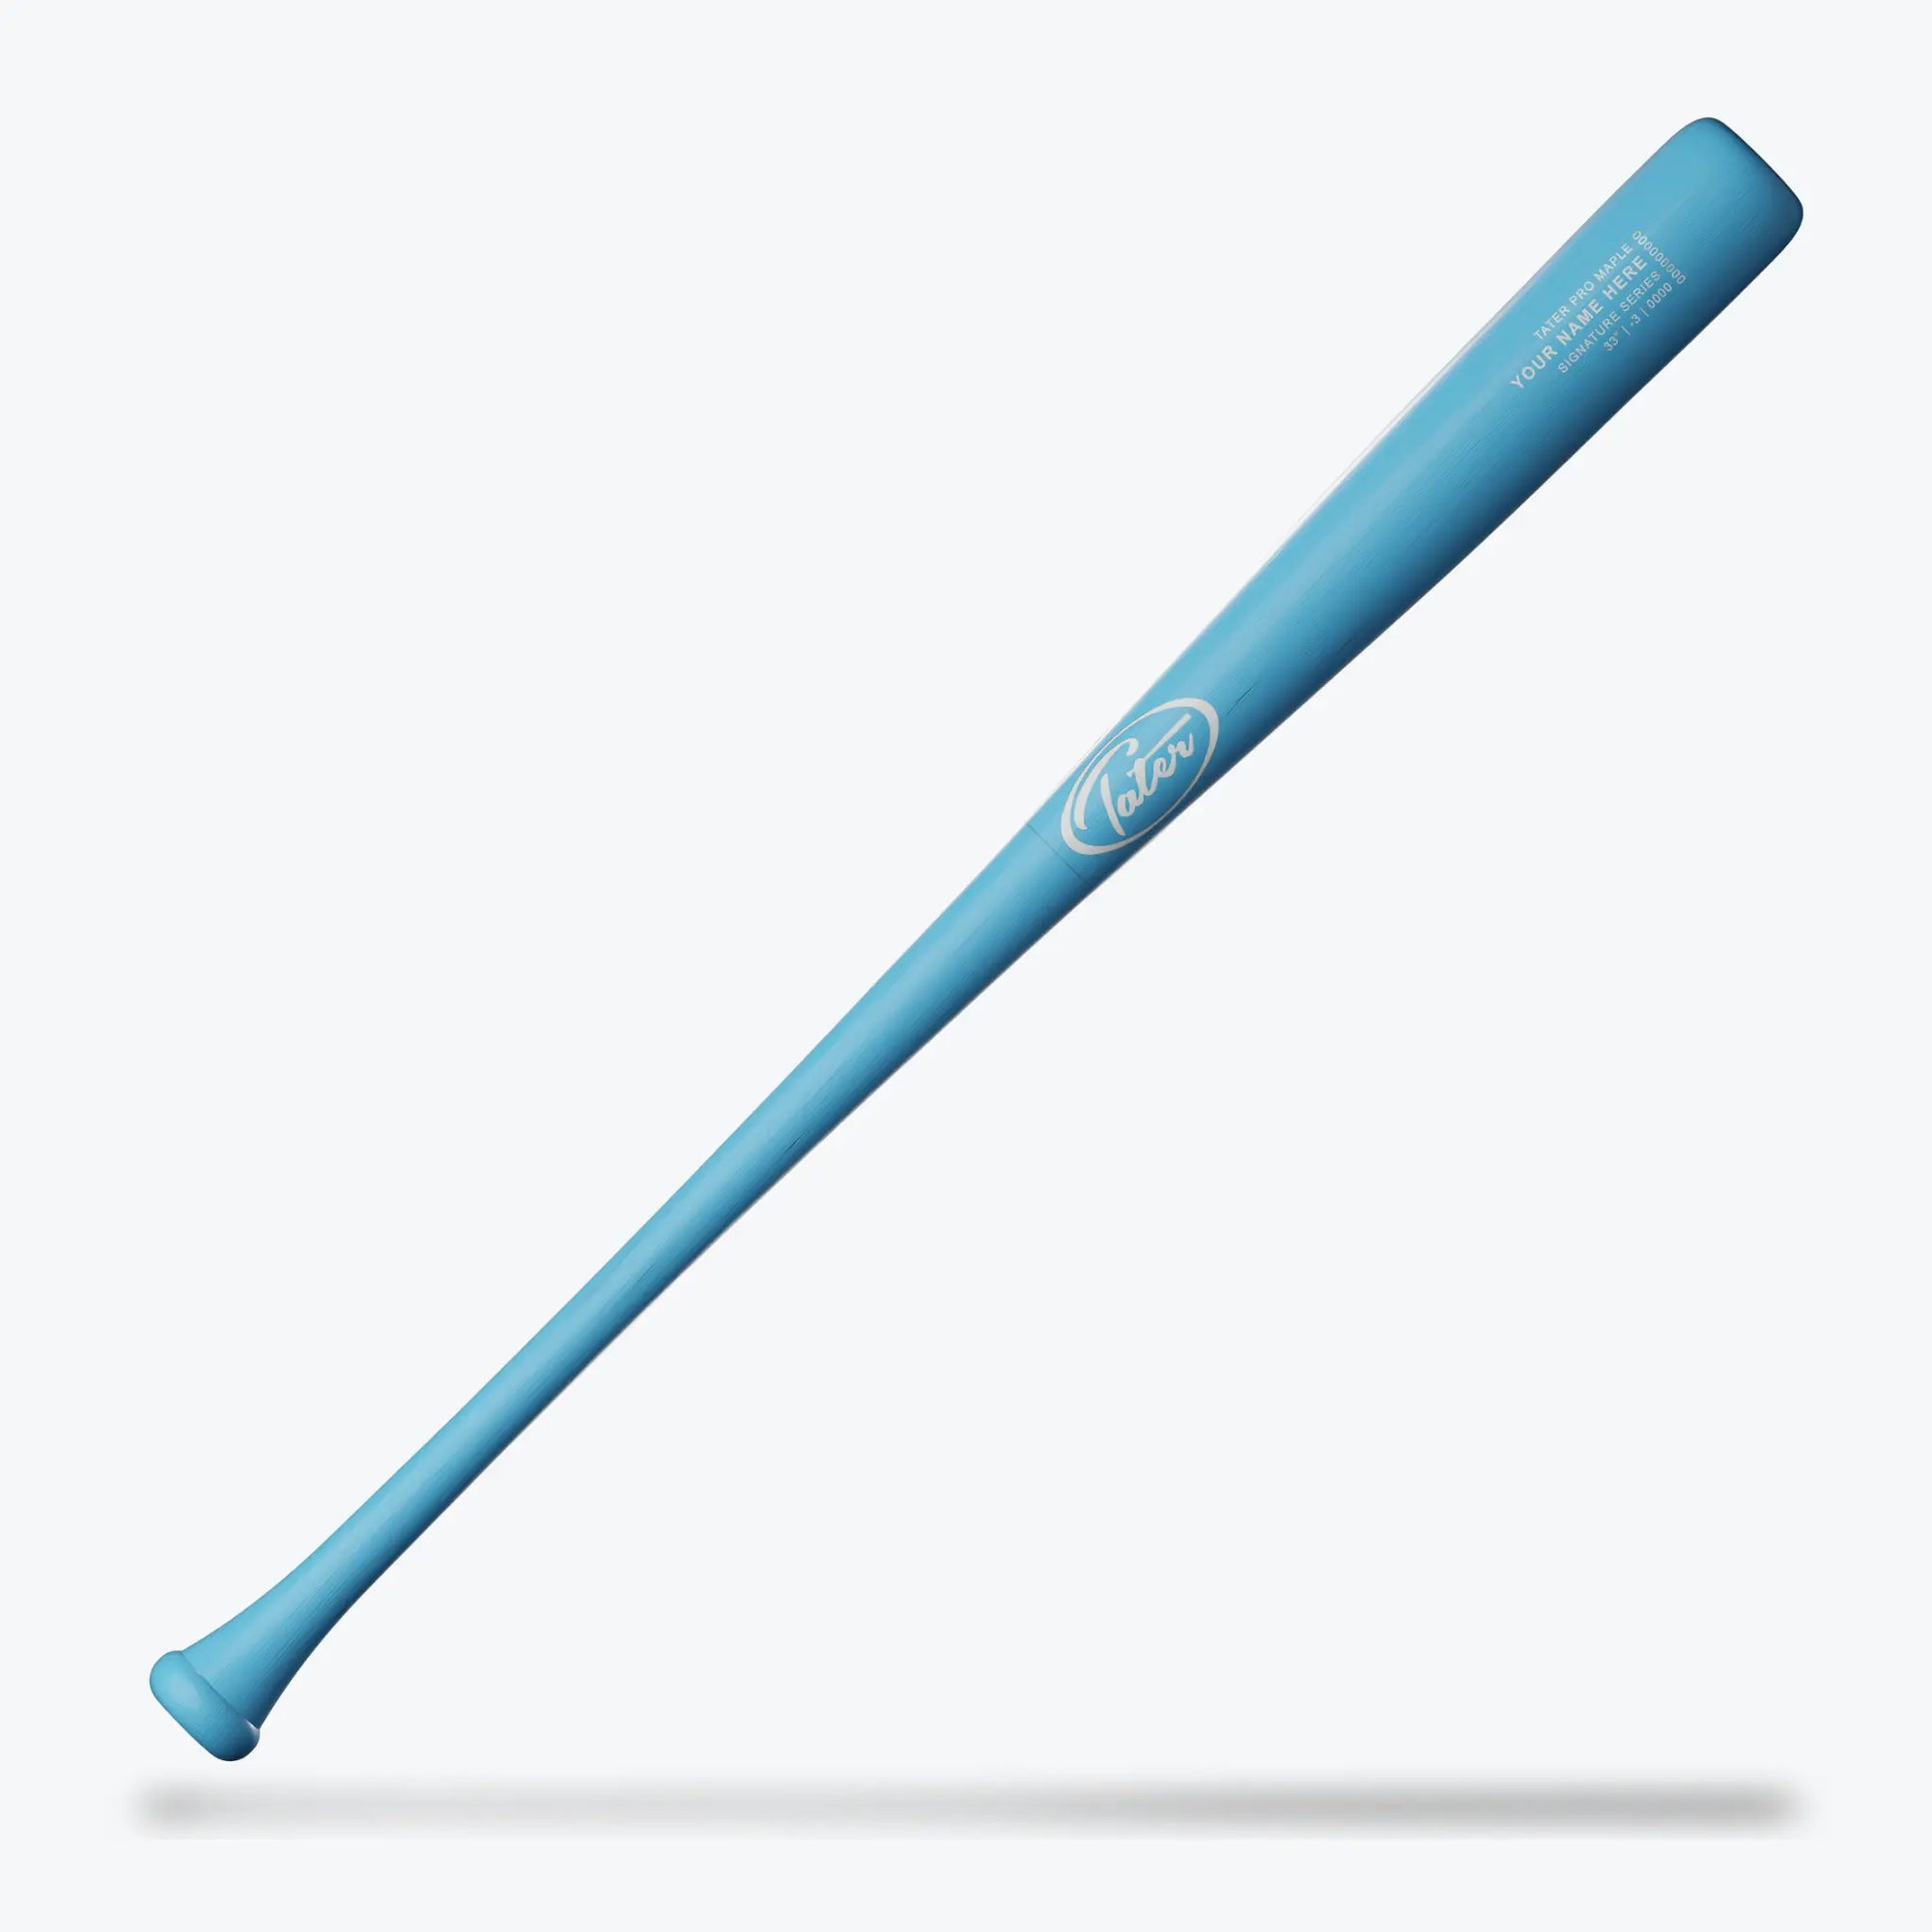 A Tater youth wood baseball bat, model 271, painted in a baby blue color, is depicted isolated against a white background. The bat's balanced drop 8 build is crafted from maple, and it's tailored to support the swing development of younger players.